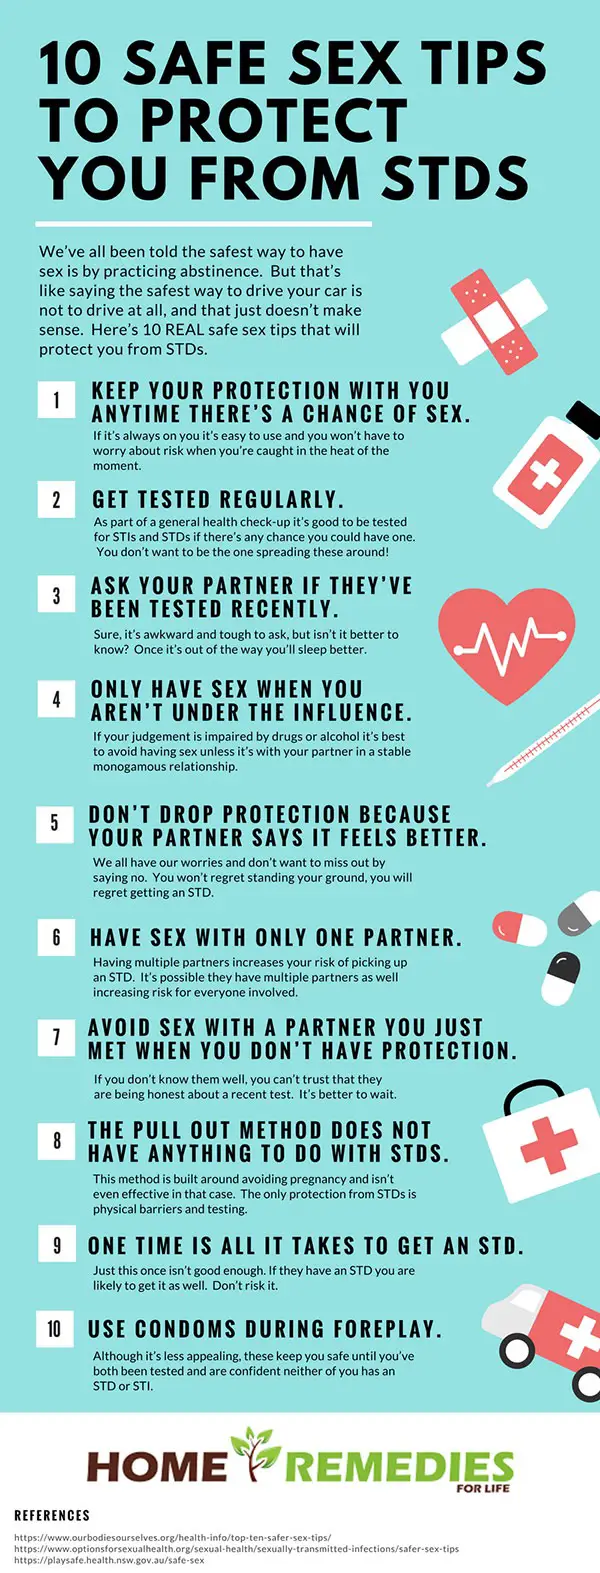 10 Safe Sex Tips to Protect You From STDs